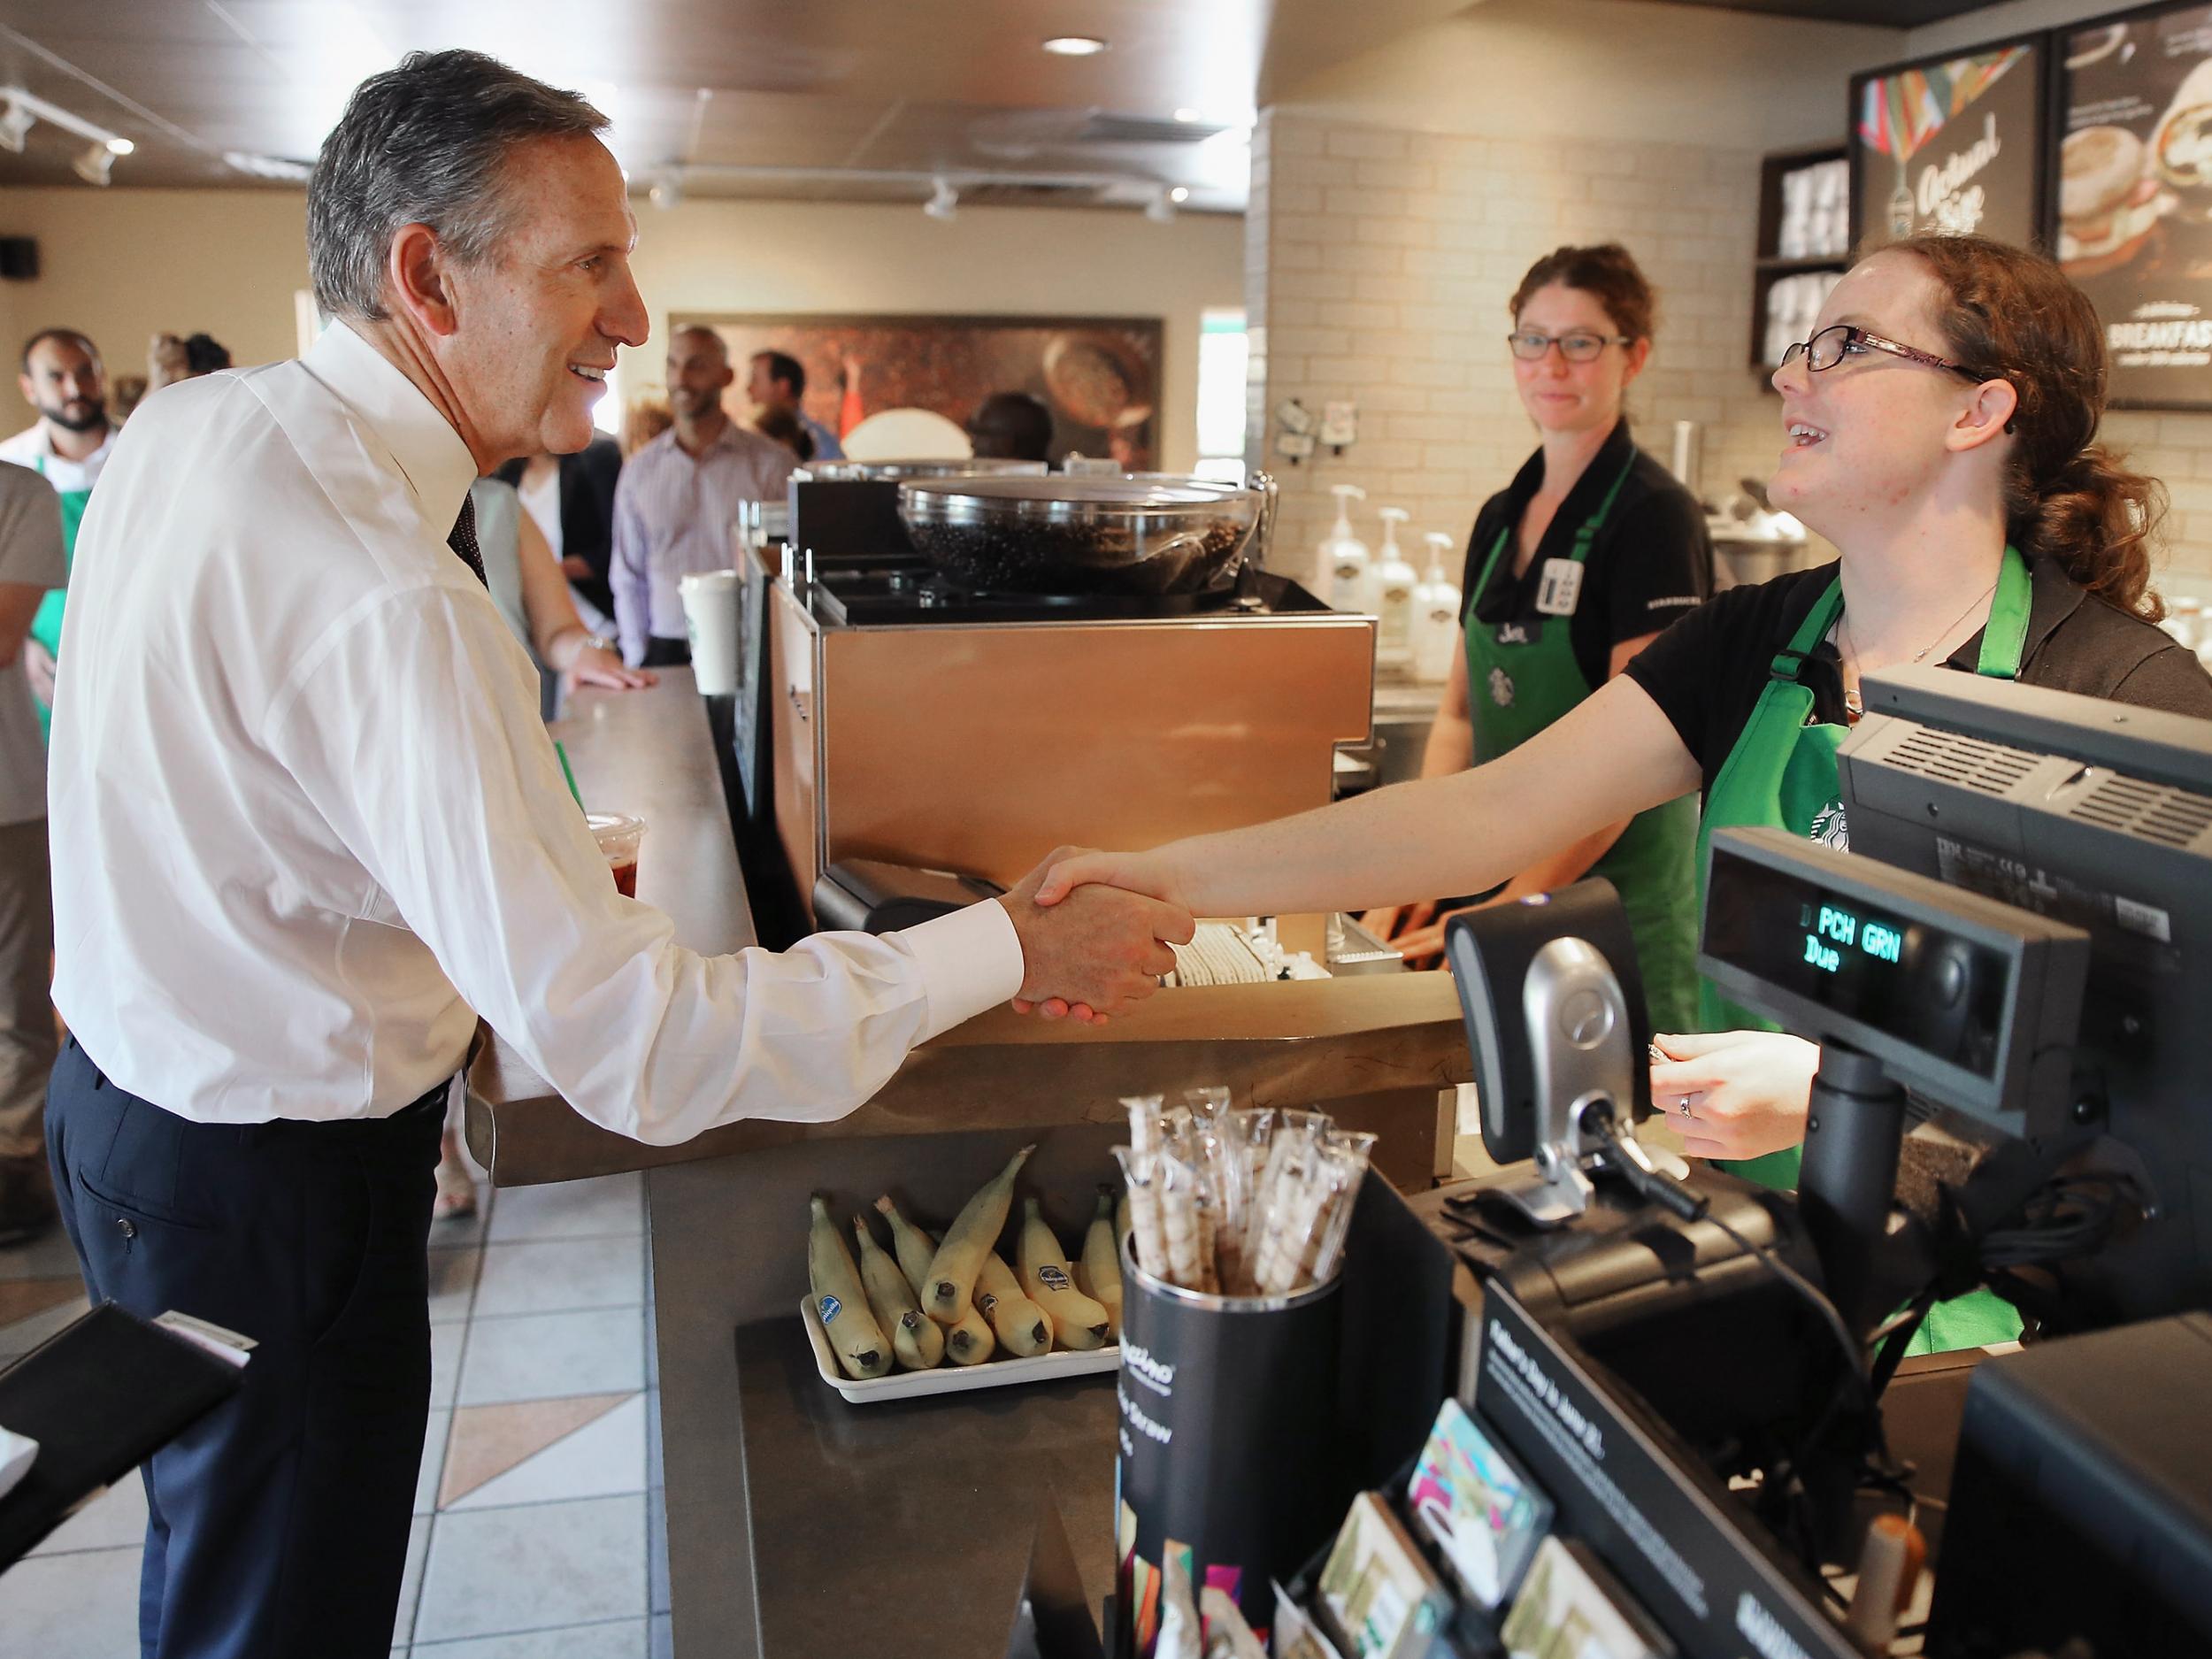 Starbucks' chief executive Howard Schultz, on Sunday, said that the coffee giant will hire 10,000 refugees over the next five years